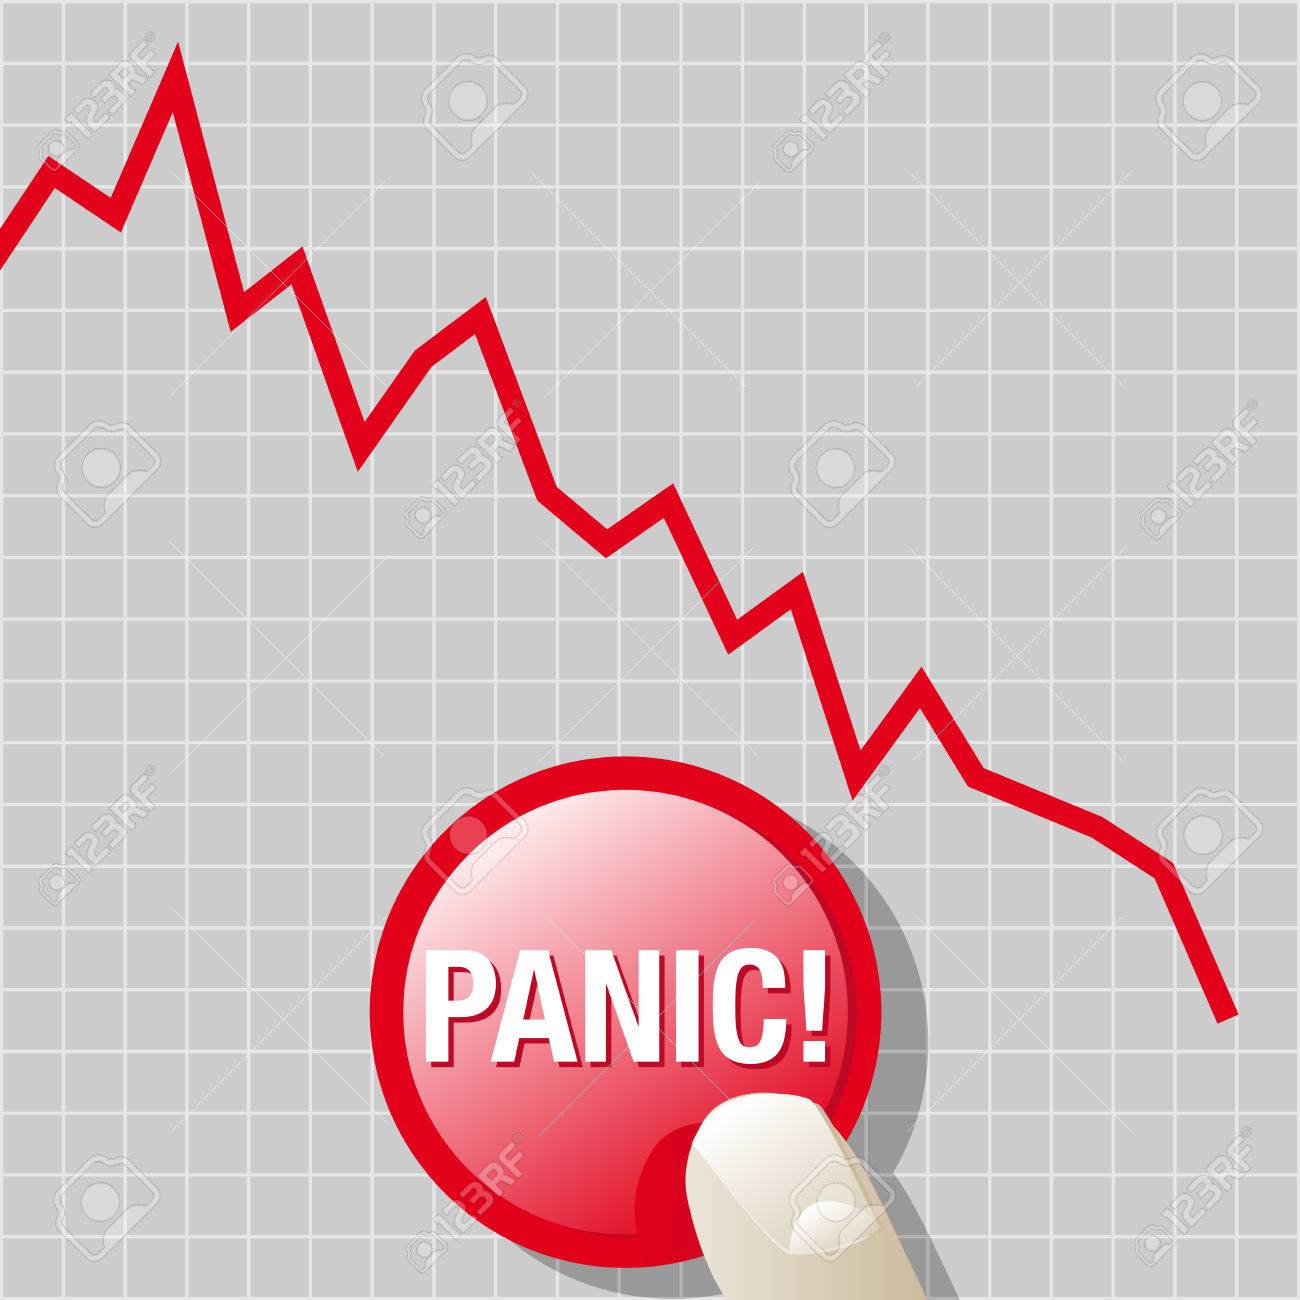 5612257-abstract-vector-illustration-of-a-downward-graph-with-a-finger-on-a-panic-button.jpg